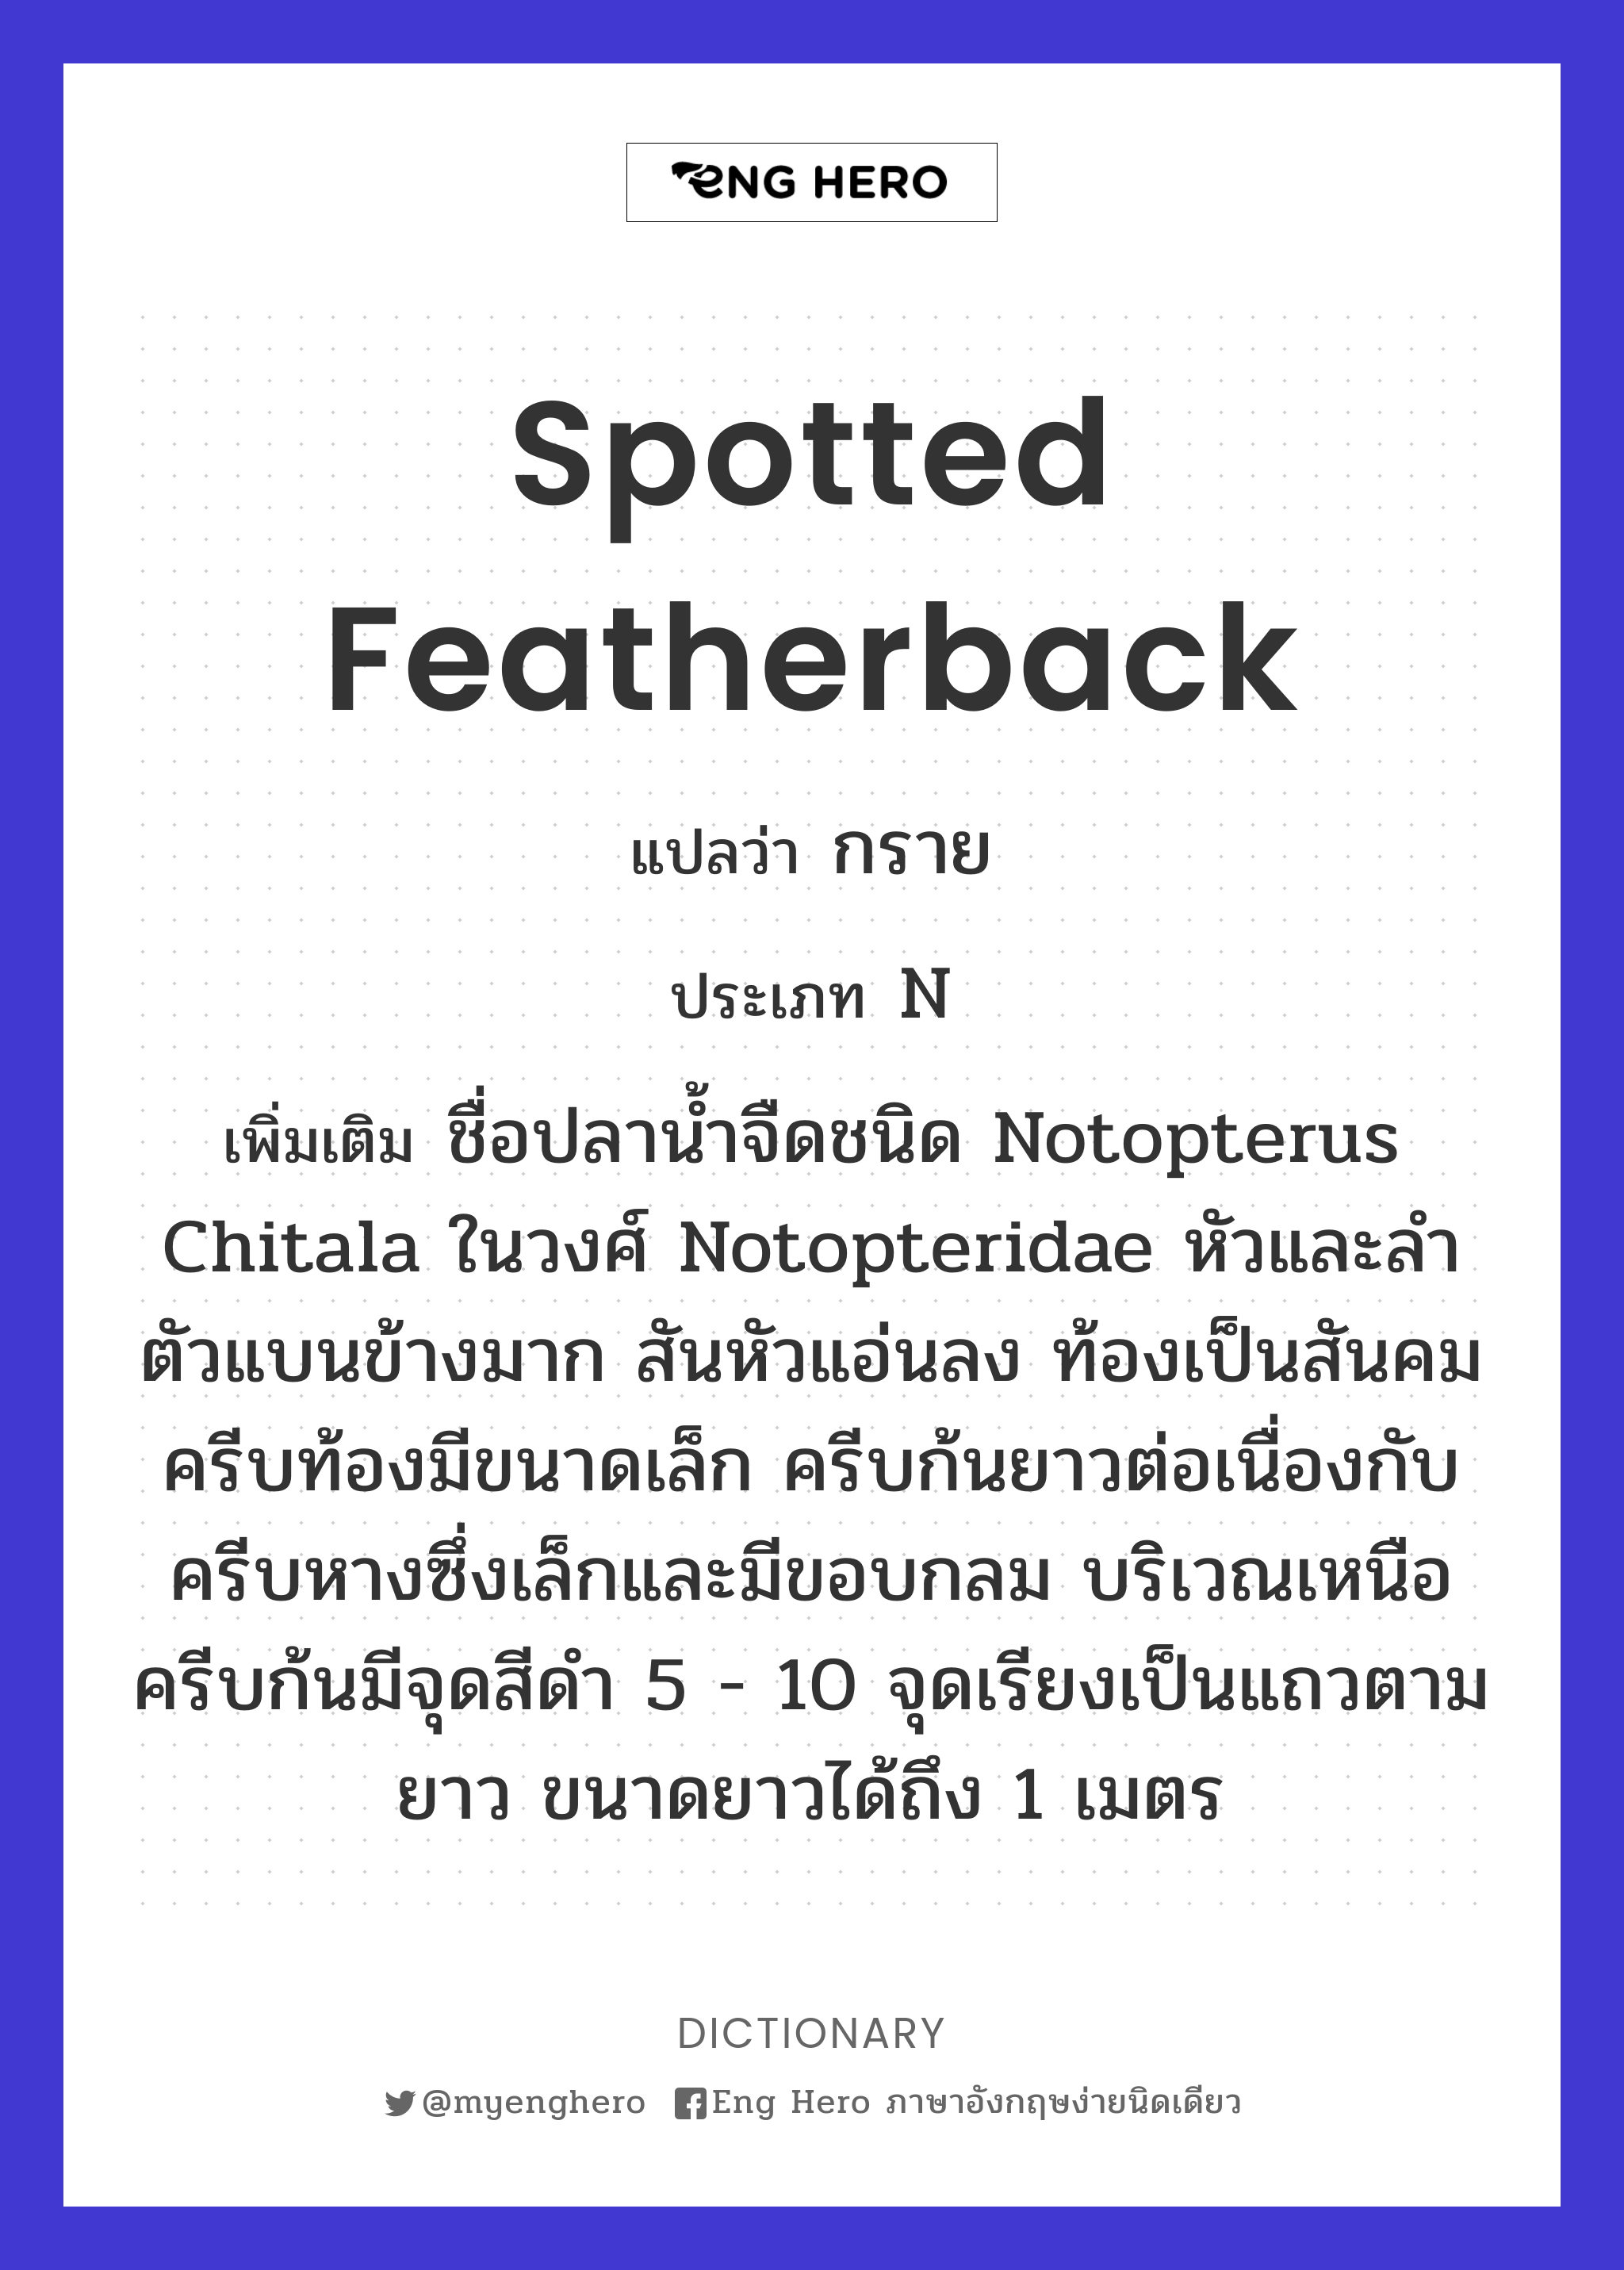 Spotted featherback